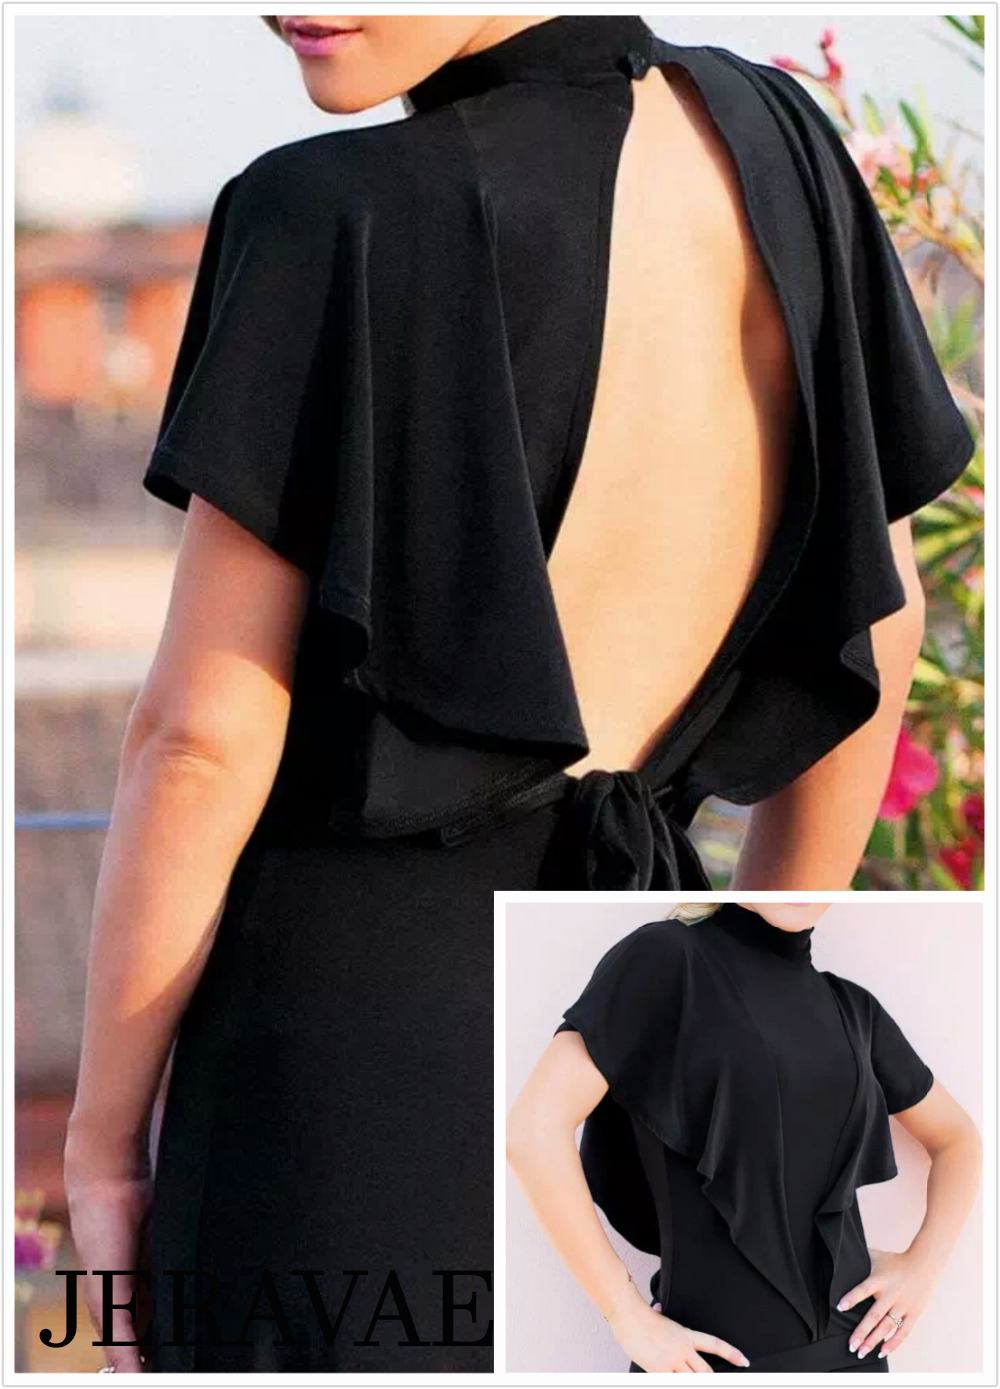 Both front and back views of the black ballroom top with separate sash sleeves and an open back topped with a turtleneck collar and bottomed with a tie